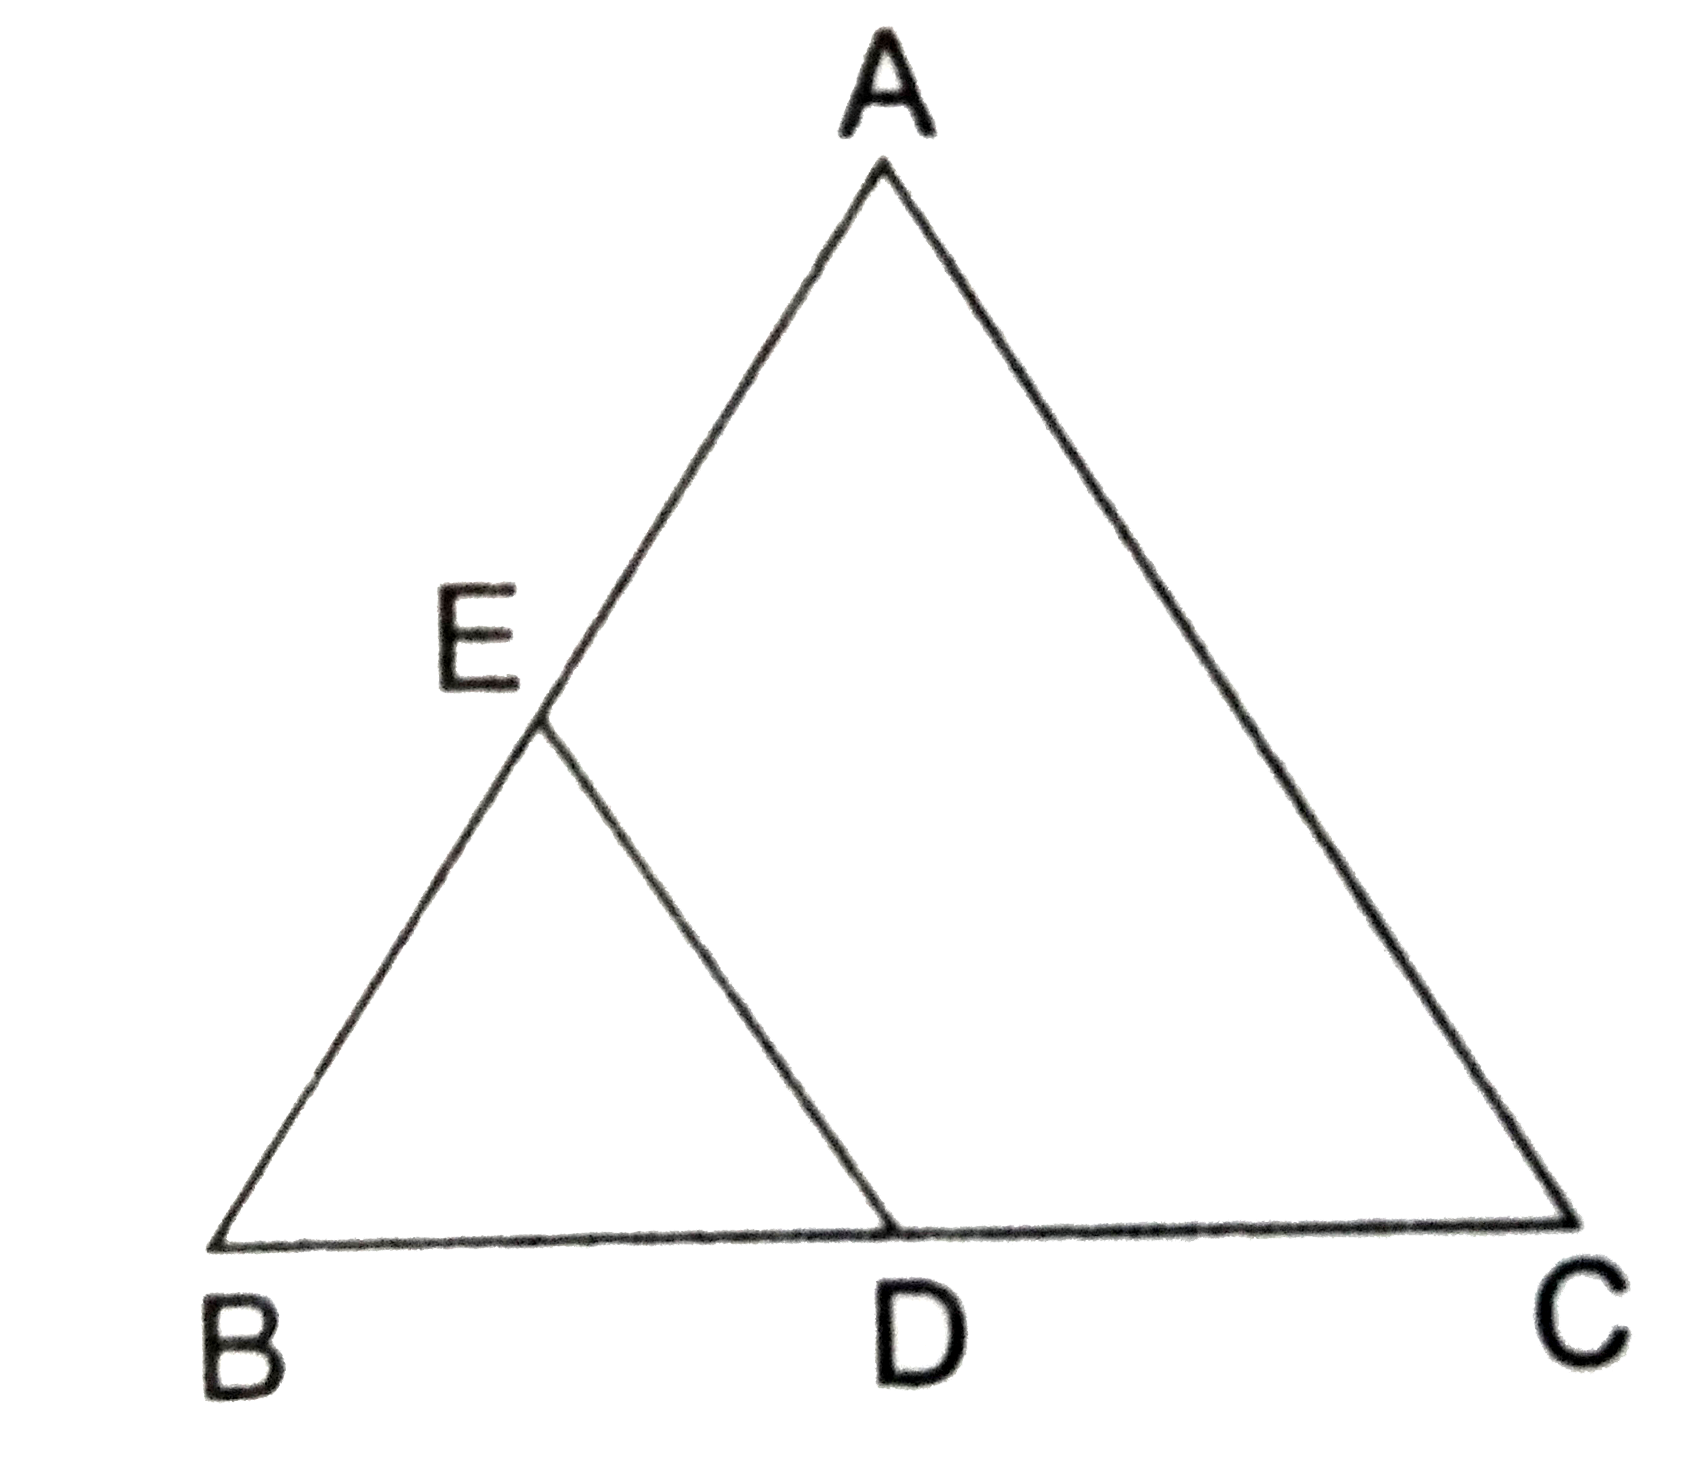 triangleABC and triangleBDE are two equilateral triangles such that D is the midpoint of BC. Then, ar(triangleBDE): ar(triangleABC) = ?